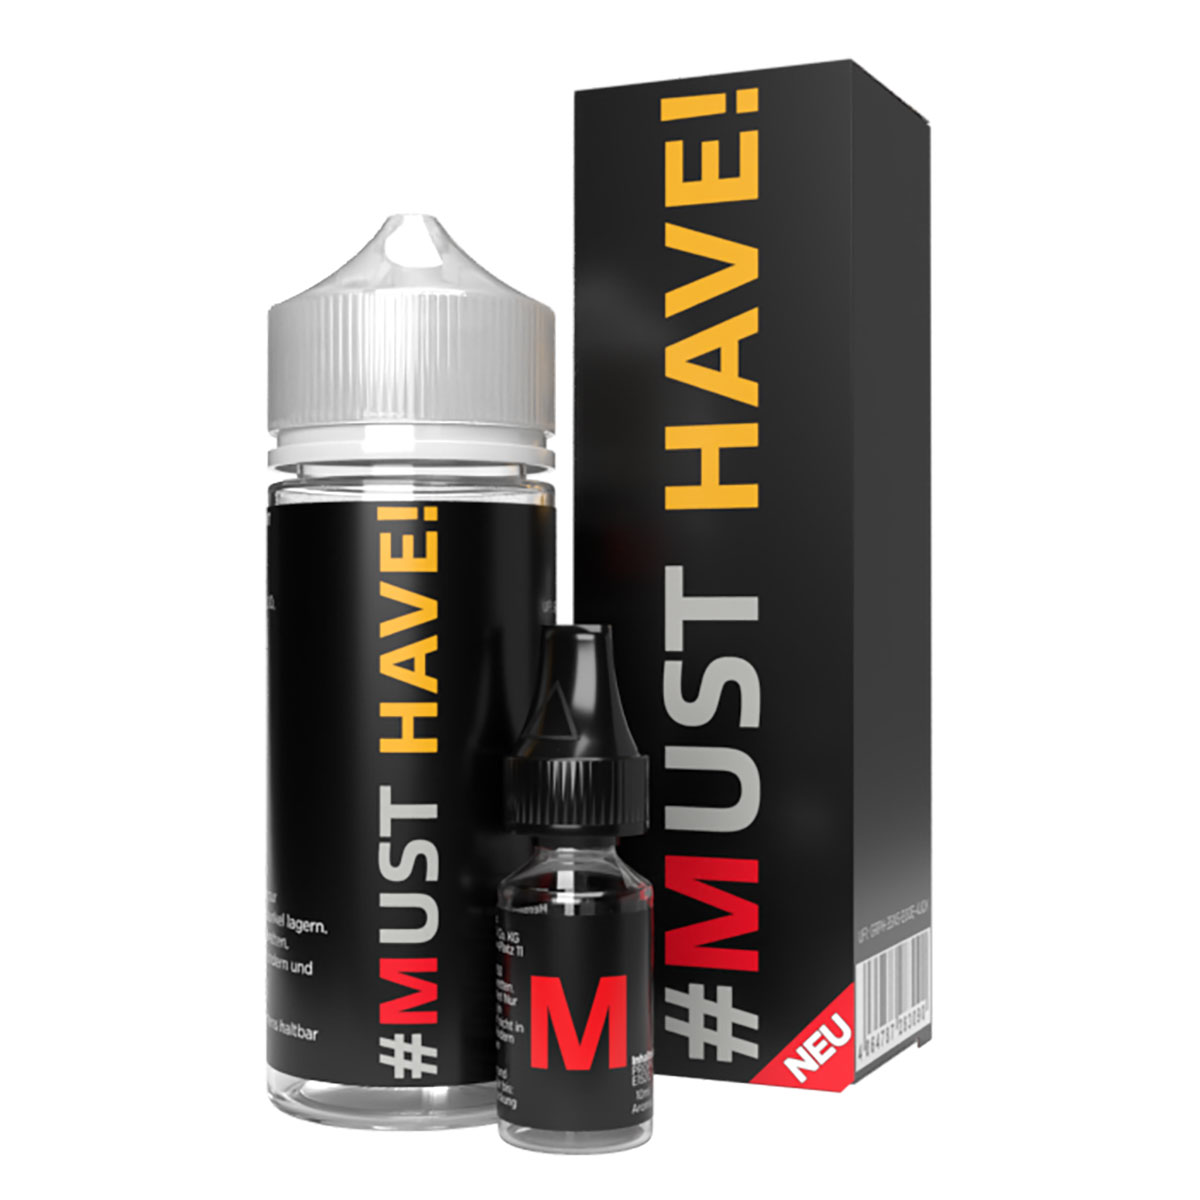 MUSTHAVE M Aroma 10 ml